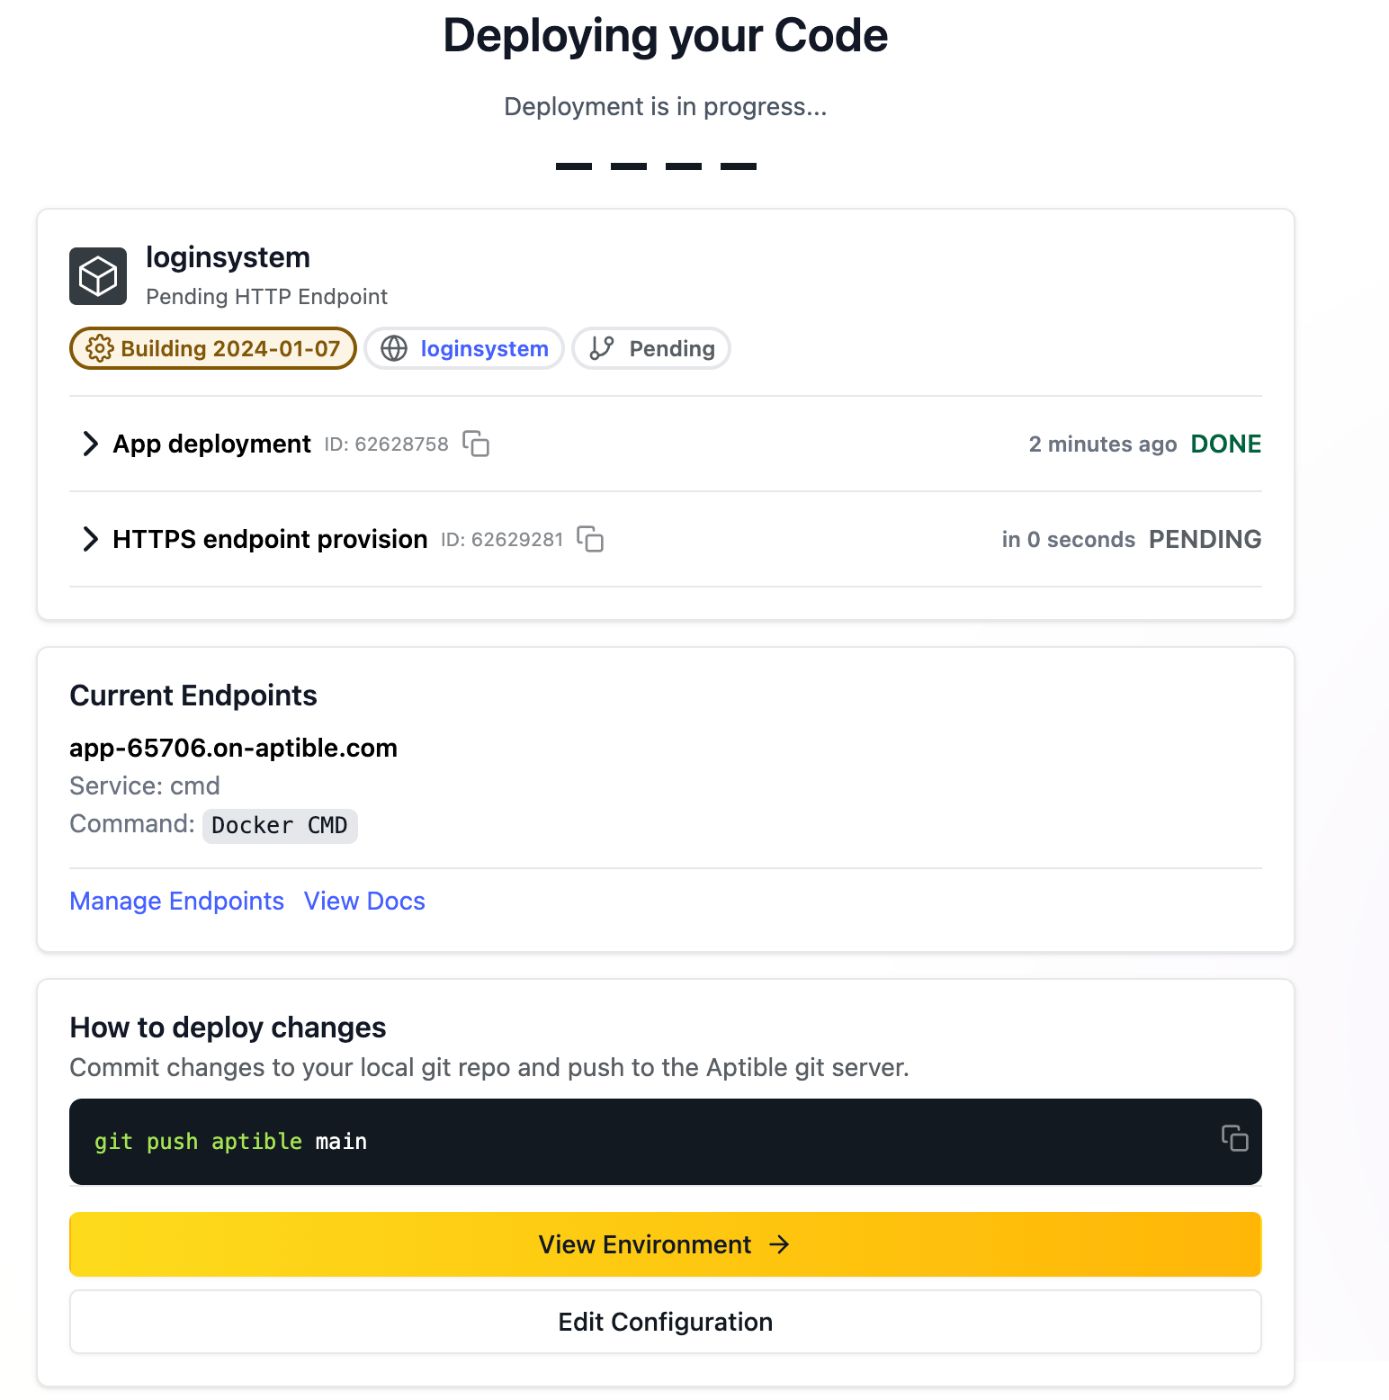 Deploy your code